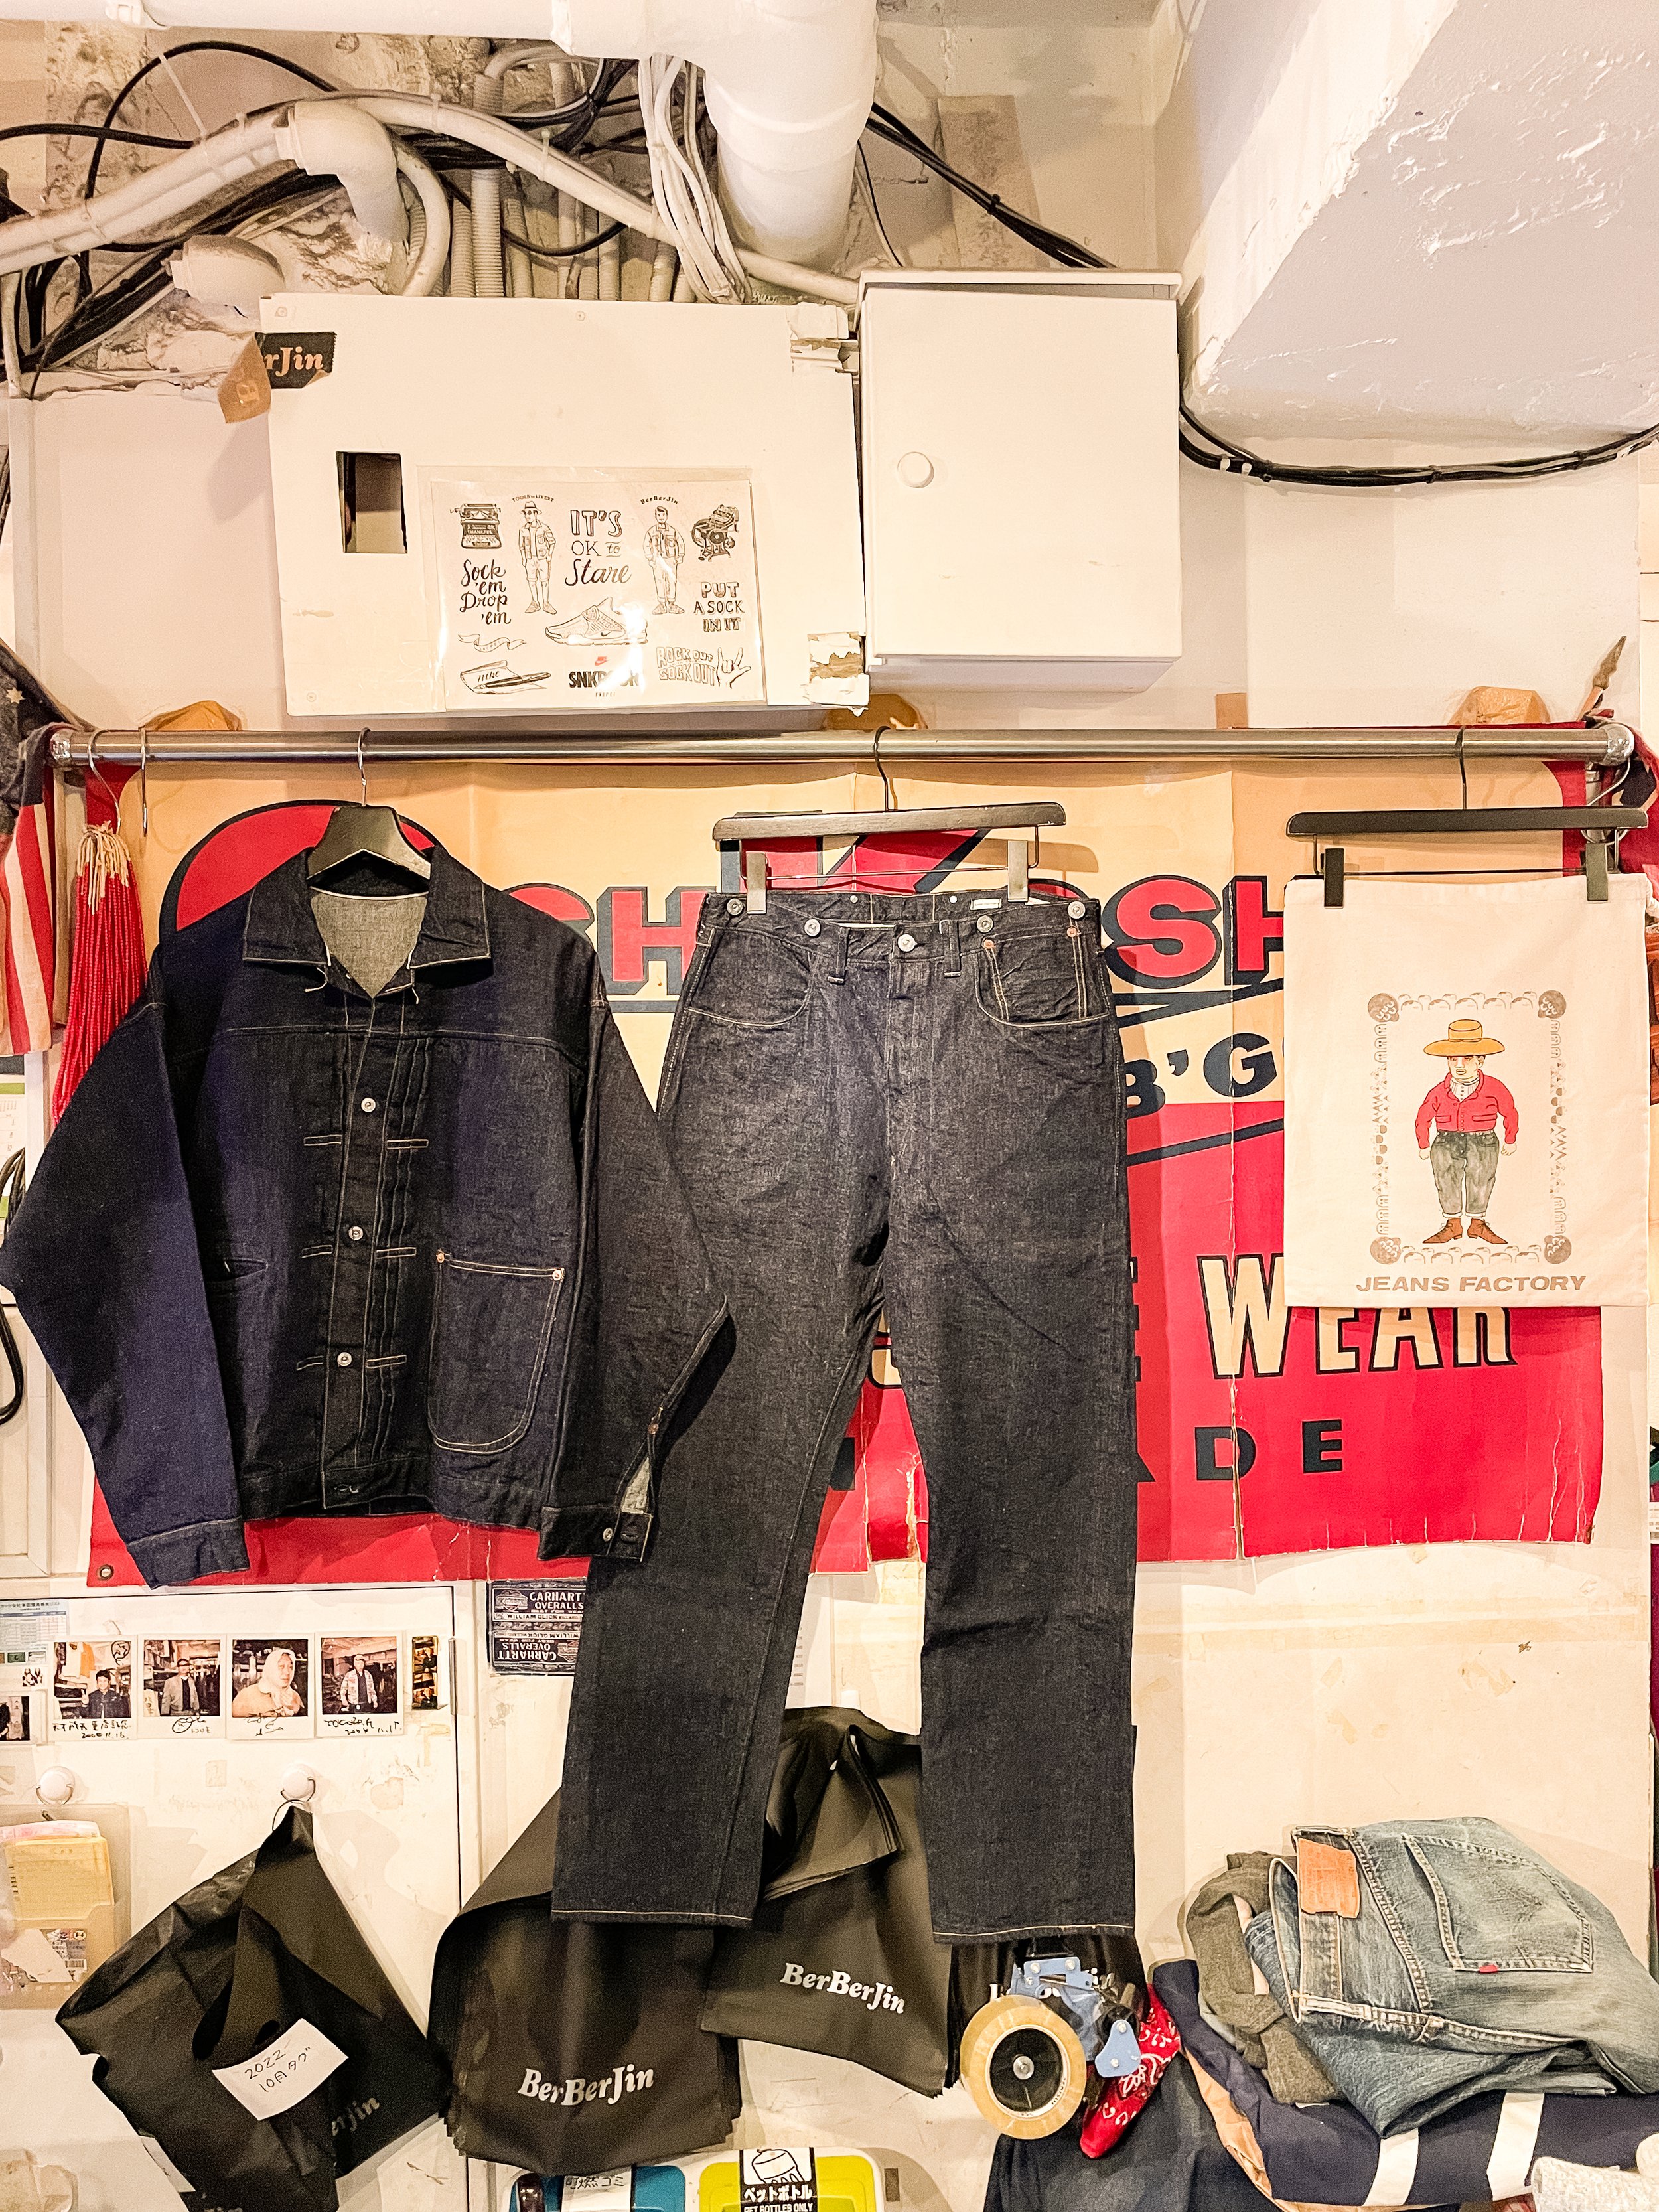 An Insider's Guide to Vintage Shopping In Tokyo —